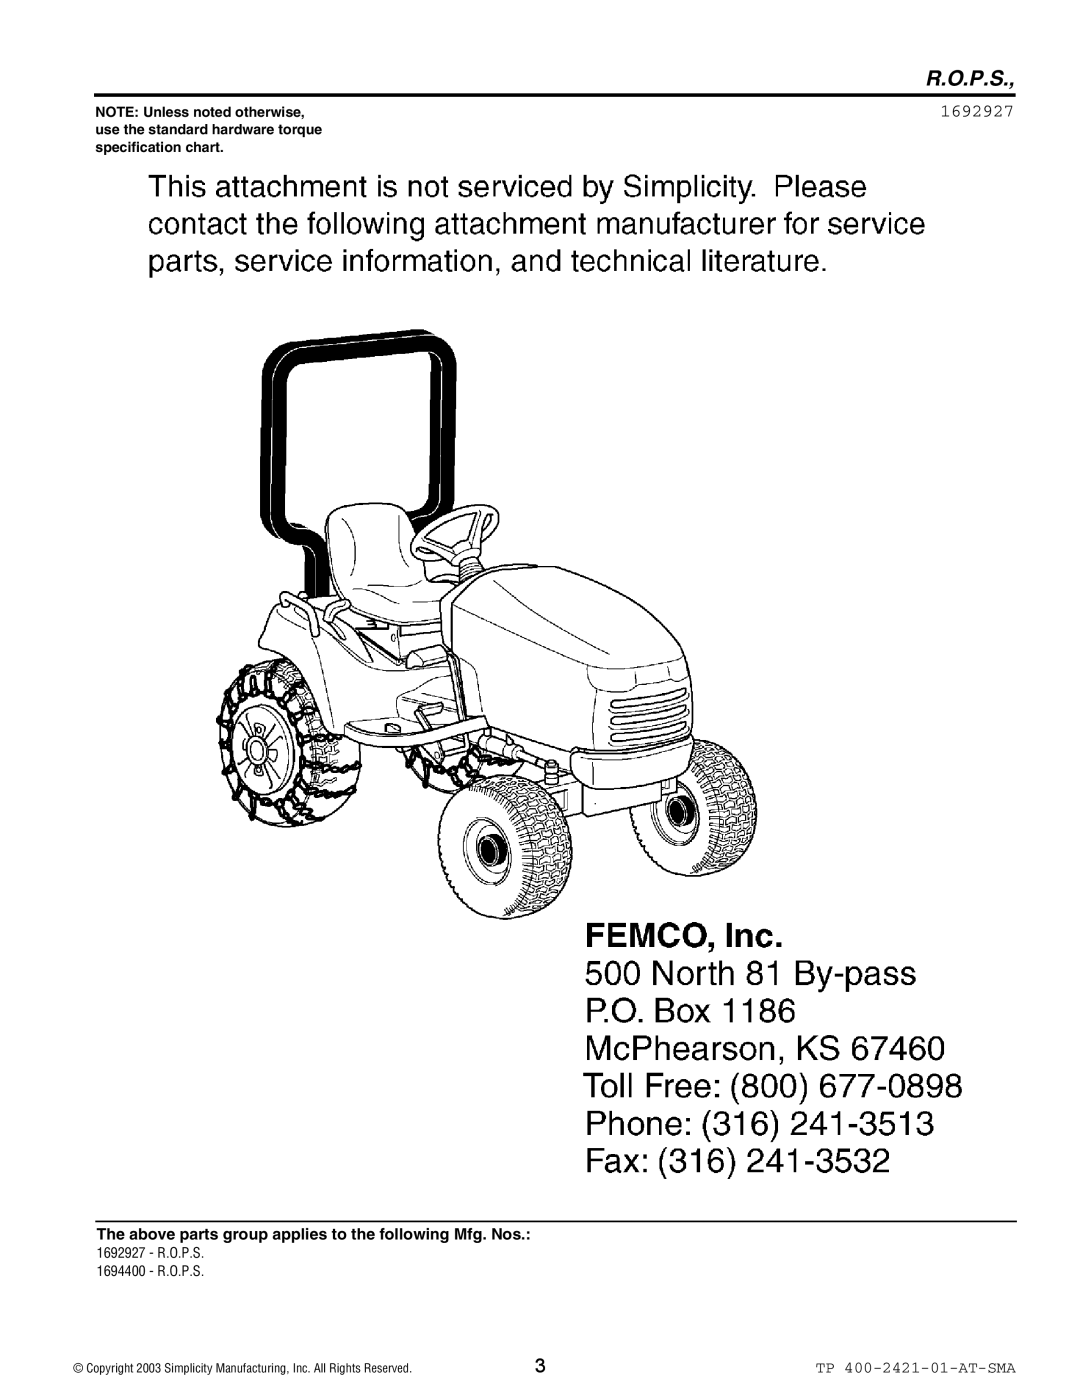 Snapper TP 400 manual R.O.P.S, NOTE Unless noted otherwise, use the standard hardware torque, specification chart, 1692927 